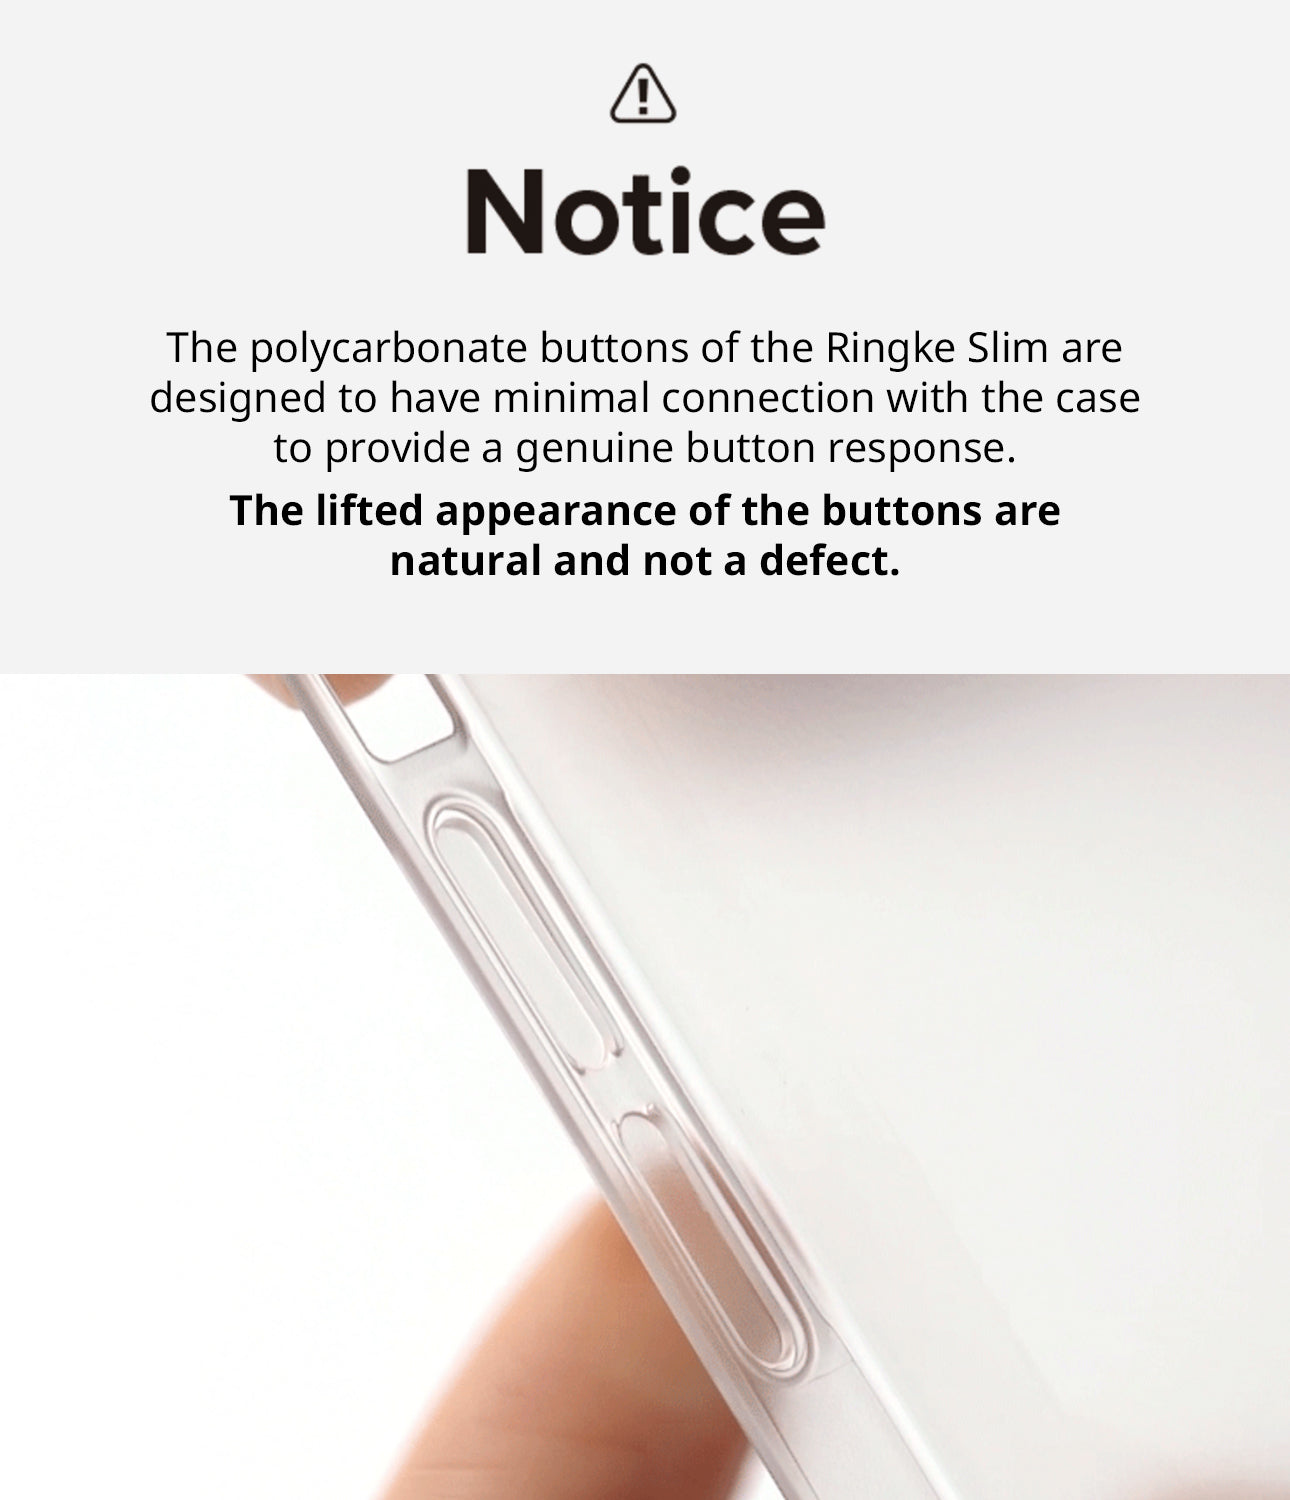 iPhone 14 Plus Case | Slim - Notice. The polycarbonate buttons of the Ringke Slim are designed to have minimal connection with the case to provide a genuine button response. The lifted appearance of the buttons are natural and not a defect.